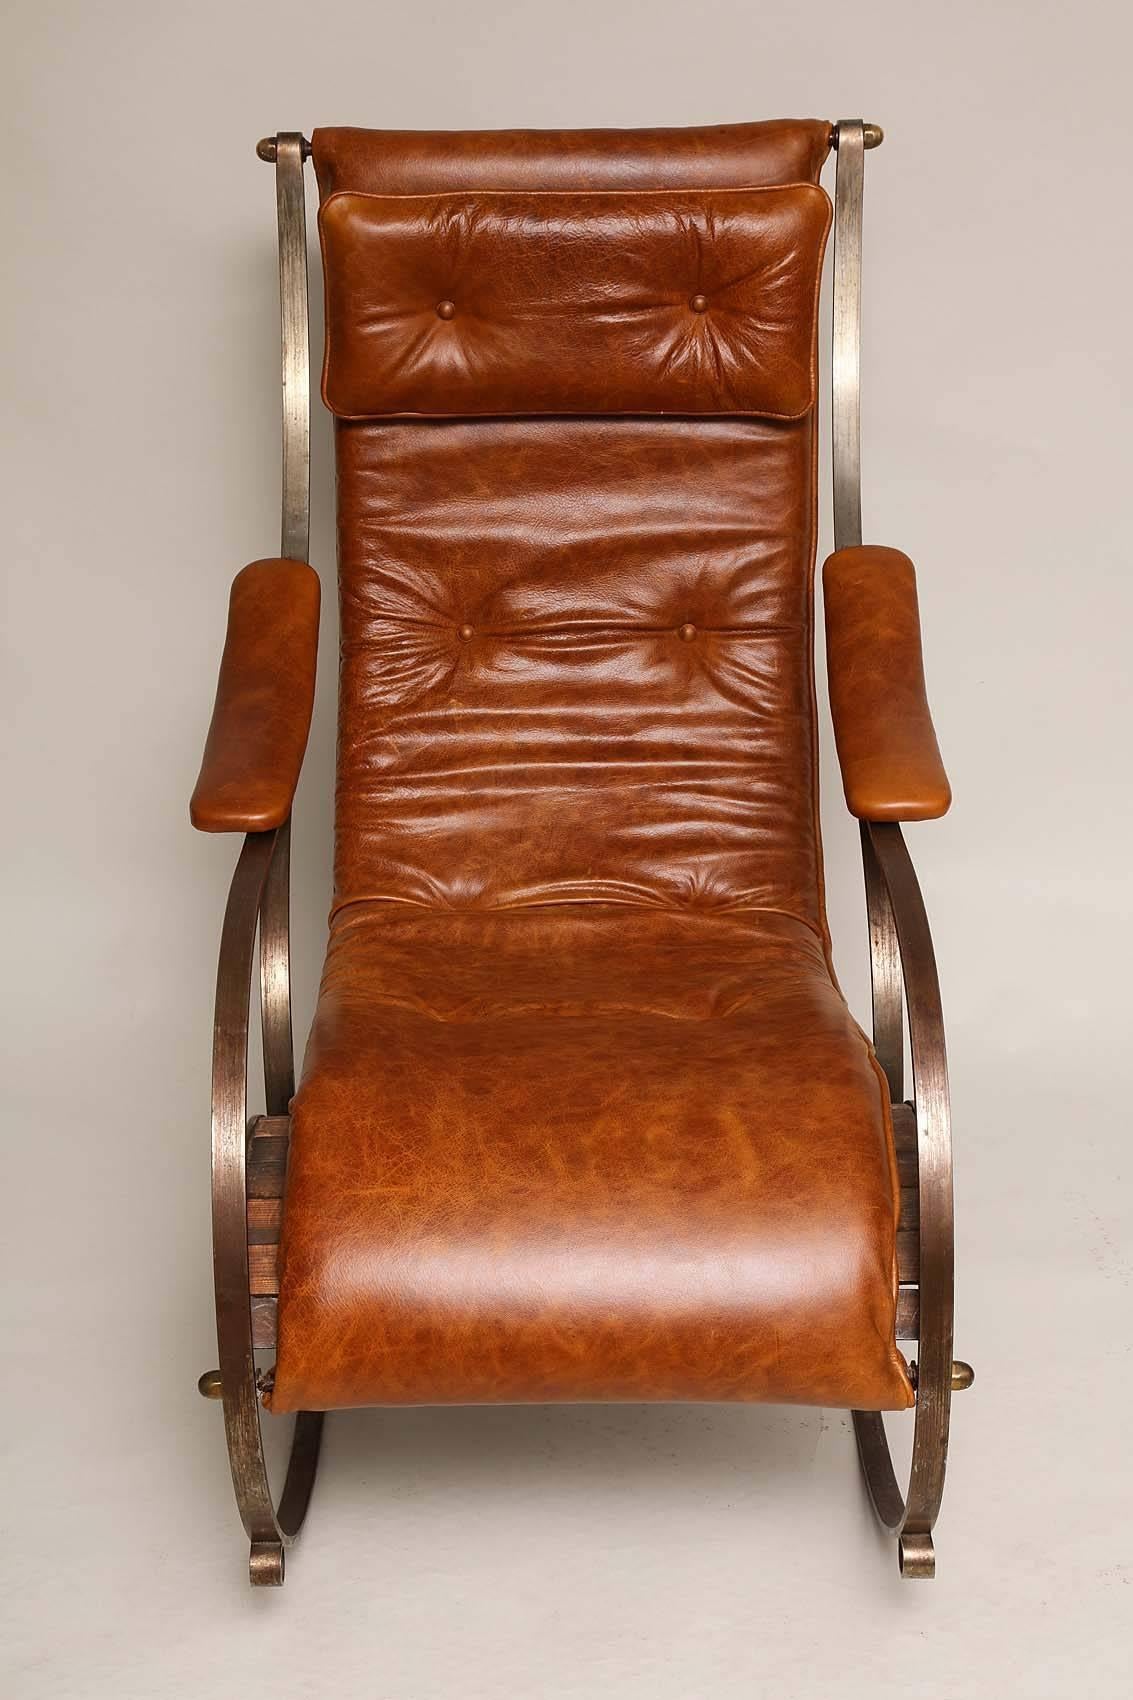 19th Century Steel and Leather Rocking Chair by R. W. Winfield 1